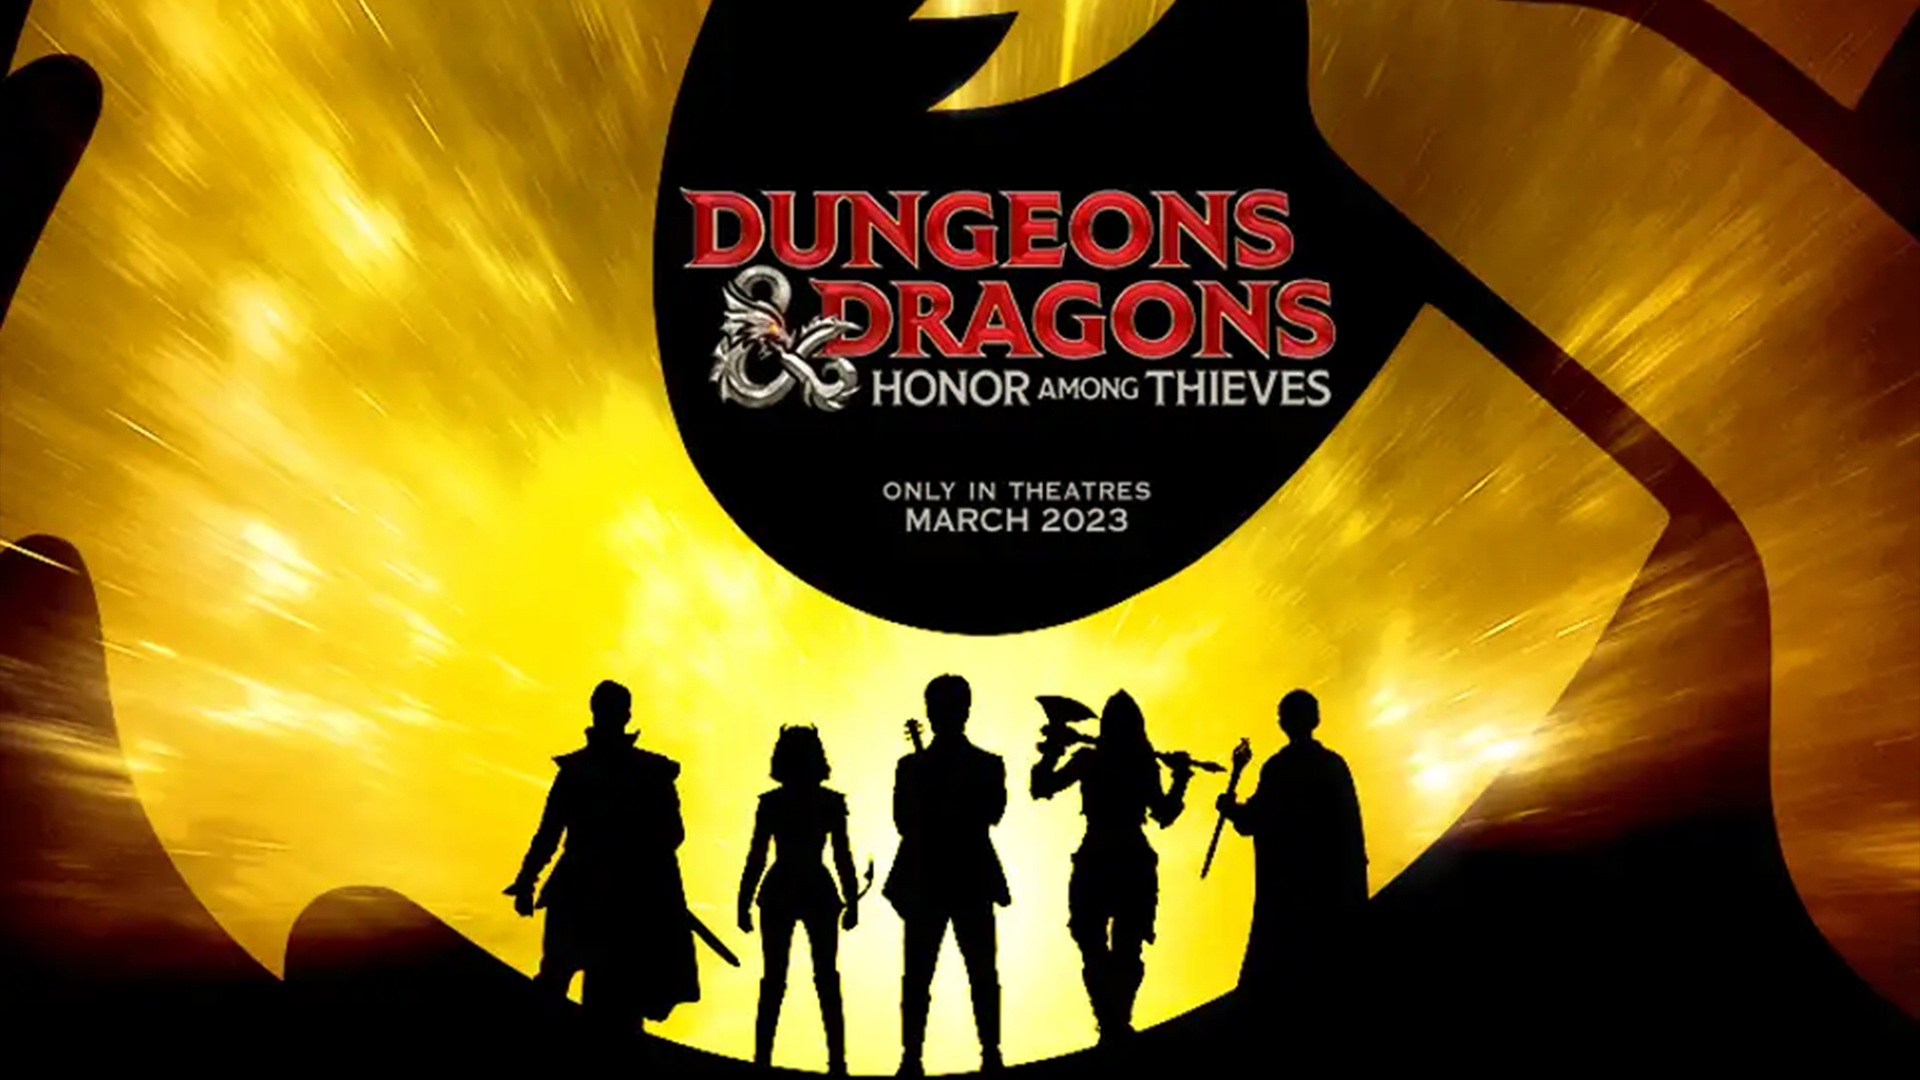 SDCC 2022 Dungeons & Dragons Honor Among Thieves Trailer